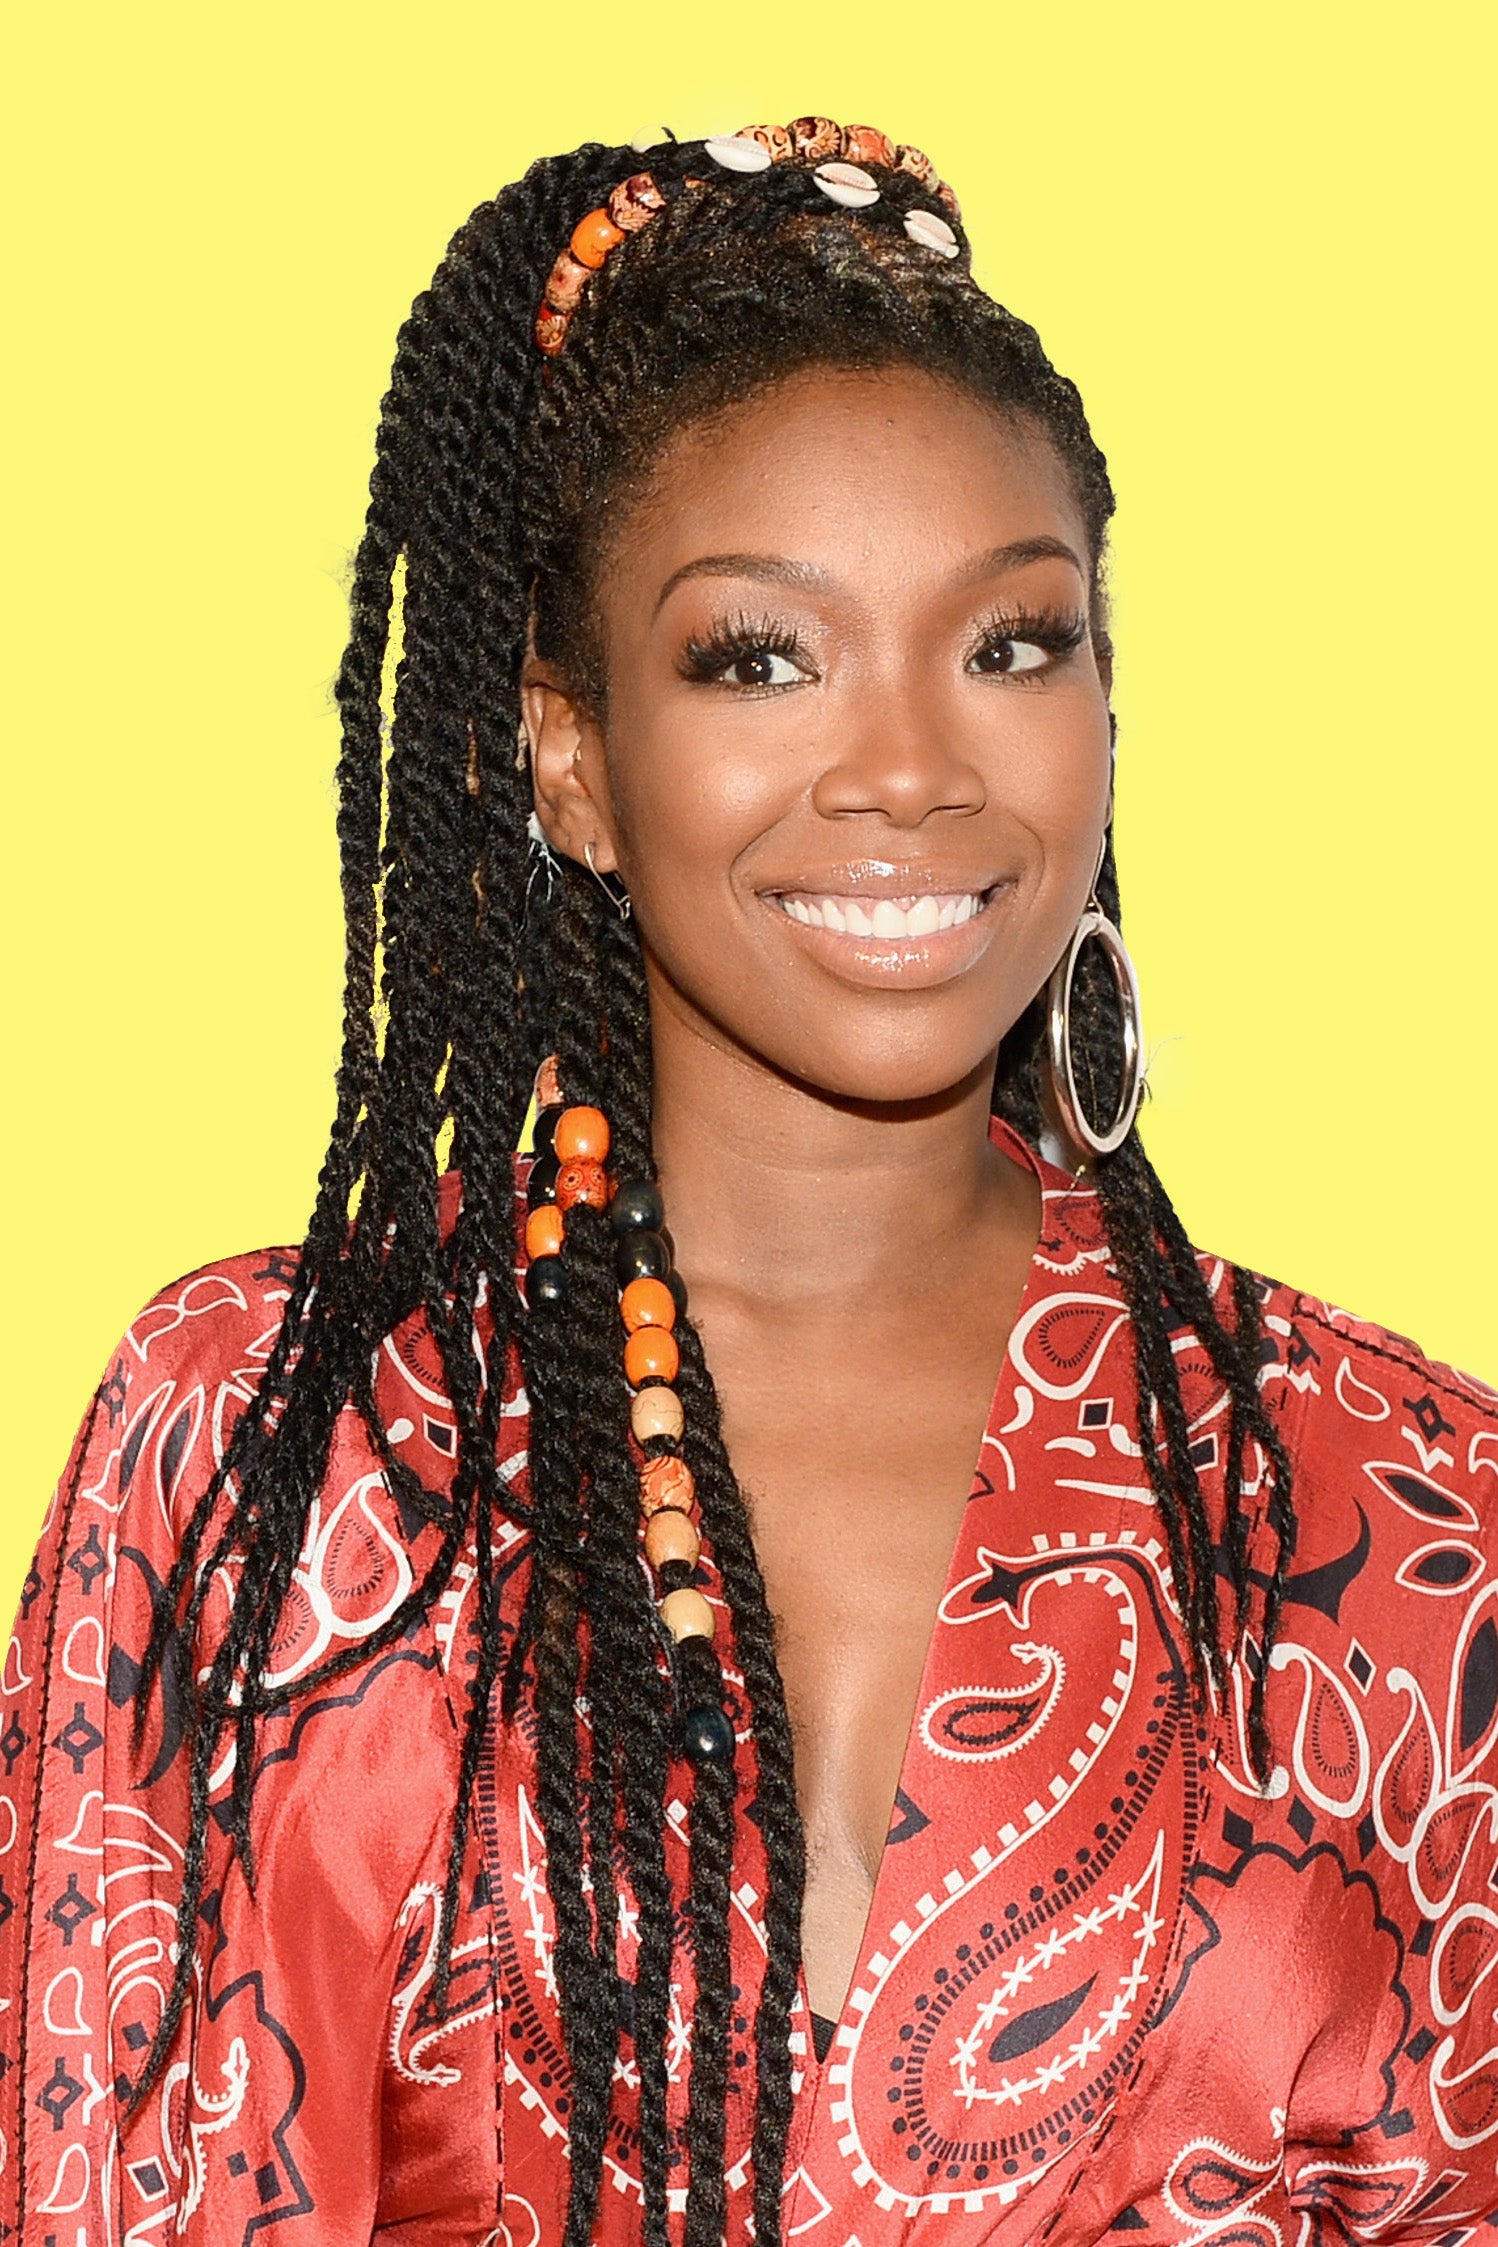 Brandy 'Home Resting' Following Hospitalization After Losing Consciousness Aboard Plane
